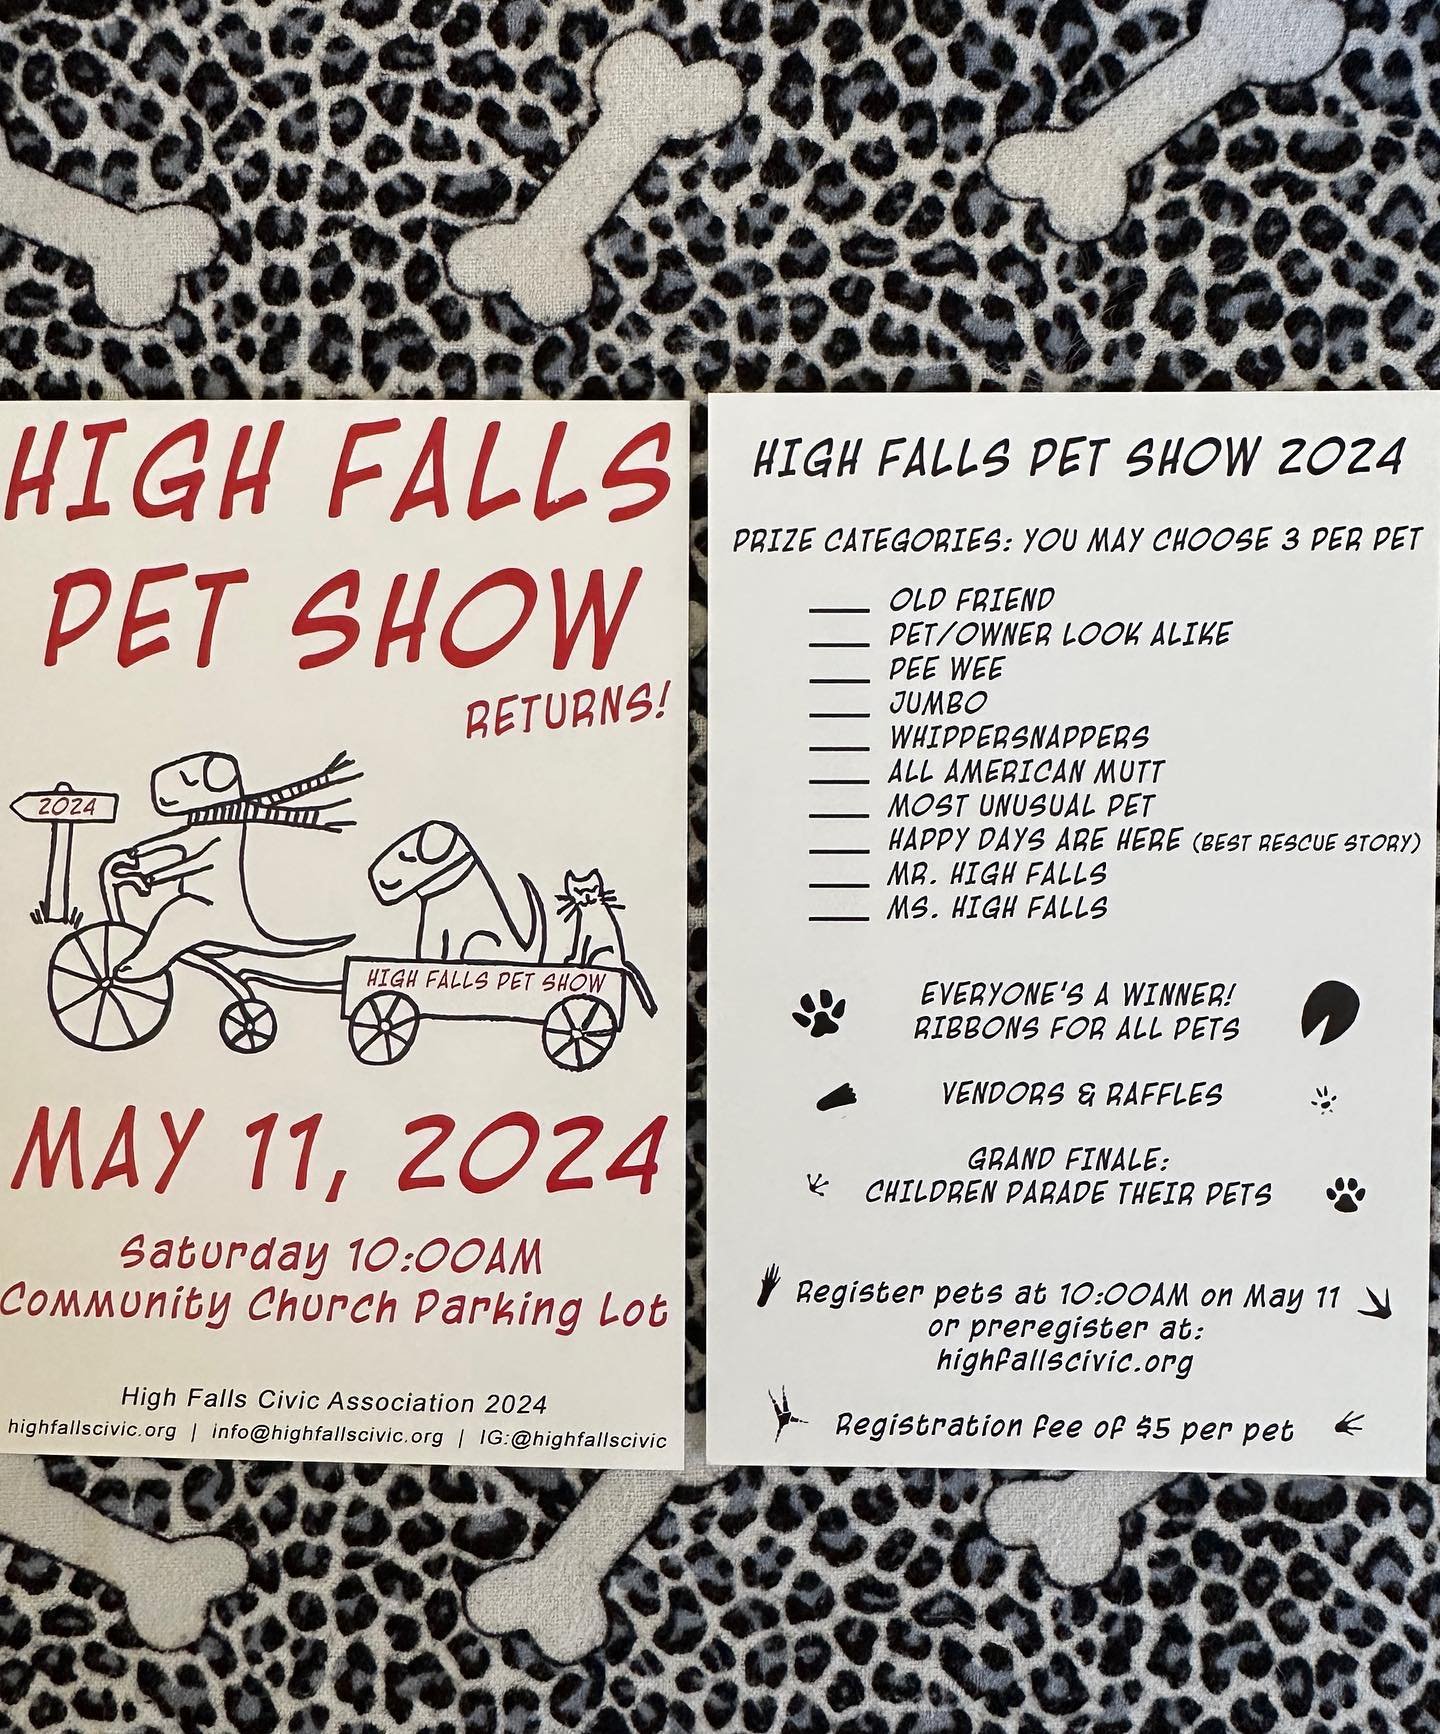 HIGH FALLS PET SHOW - potential to-do list

Save The Date (May 11th)
Ask your pet if they wanna be a contender?
If so, pre-register them at highfallscivic.org
Buy many, many raffle tickets (see previous post for availability)
Show up on the 11th and 